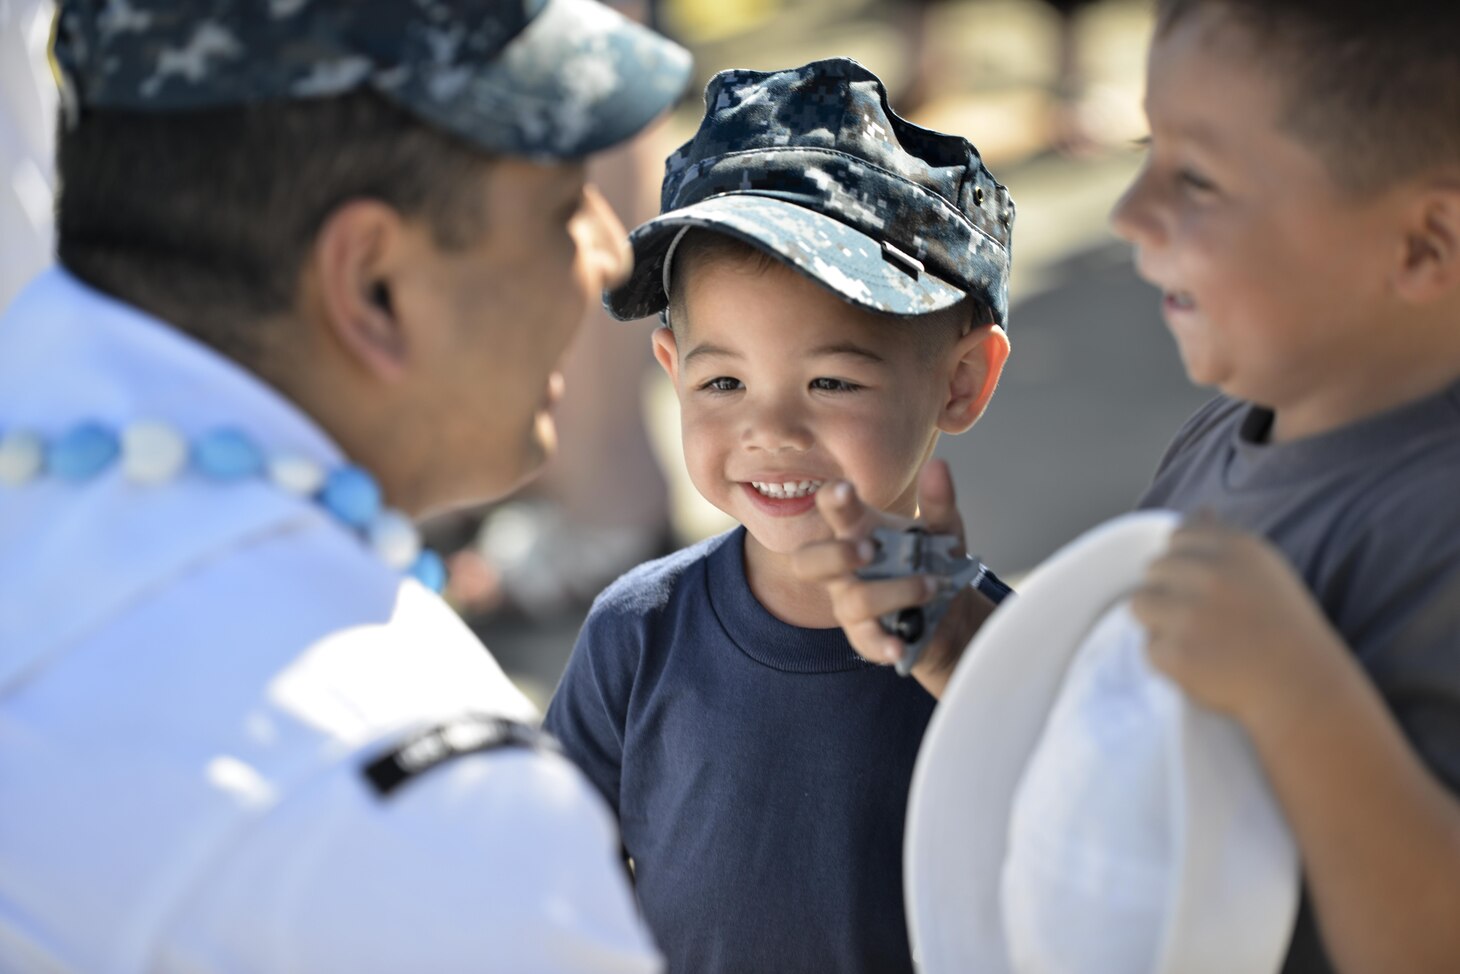 PEARL HARBOR (March 17, 2016) Culinary Specialist 2nd Class Claro Marasigan, of Portland, Ore., greets his sons Cameron, right, and CJ, middle, following the return of the Virginia-class fast-attack submarine USS North Carolina (SSN 777) to Pearl Harbor after completing a successful six-month Western Pacific deployment. (U.S. Navy photo by Mass Communication Specialist 2nd Class Michael H. Lee/Released)